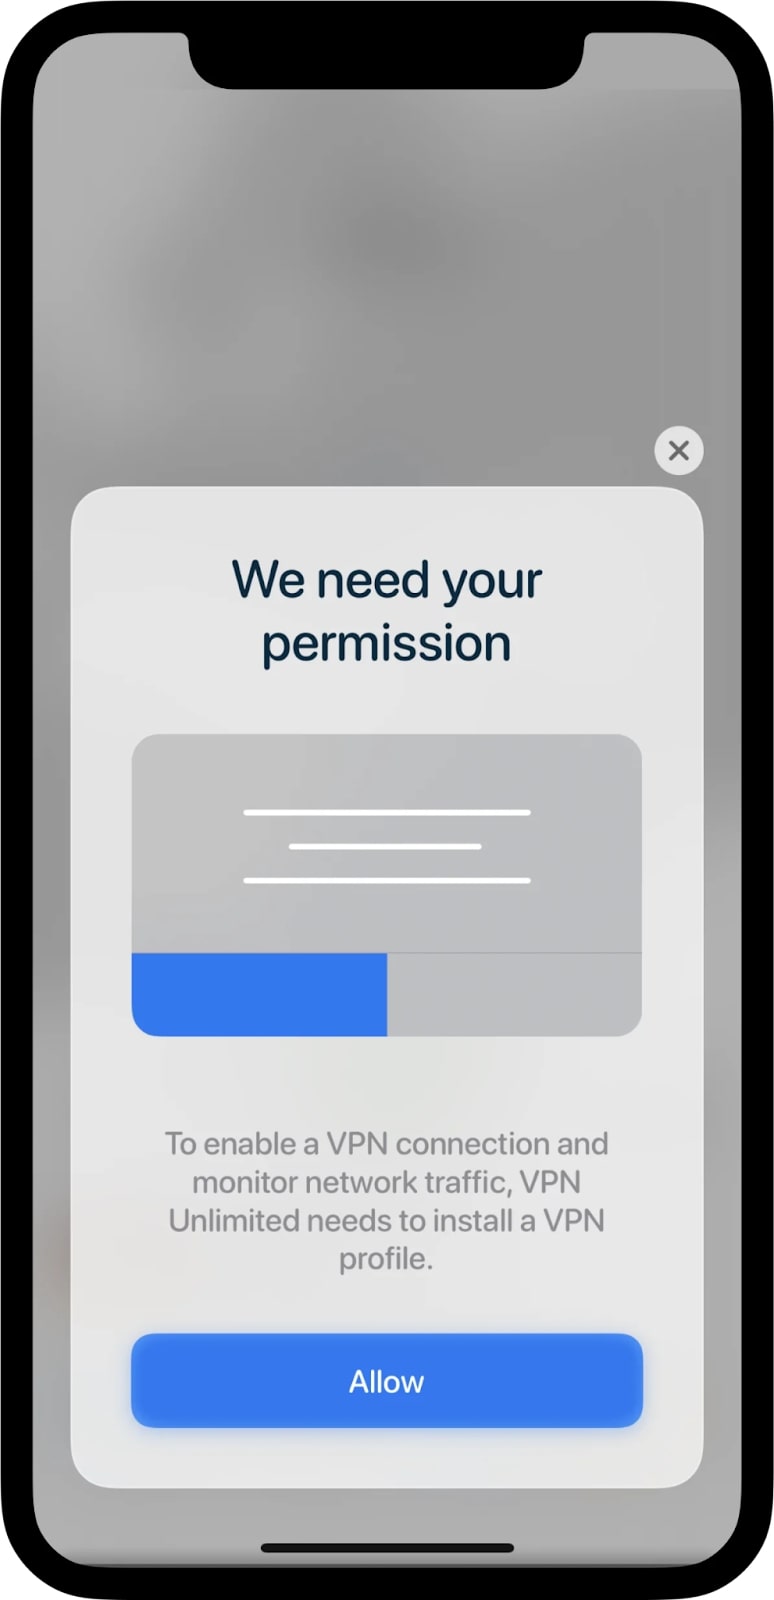 Launching VPN unlimited on your phone